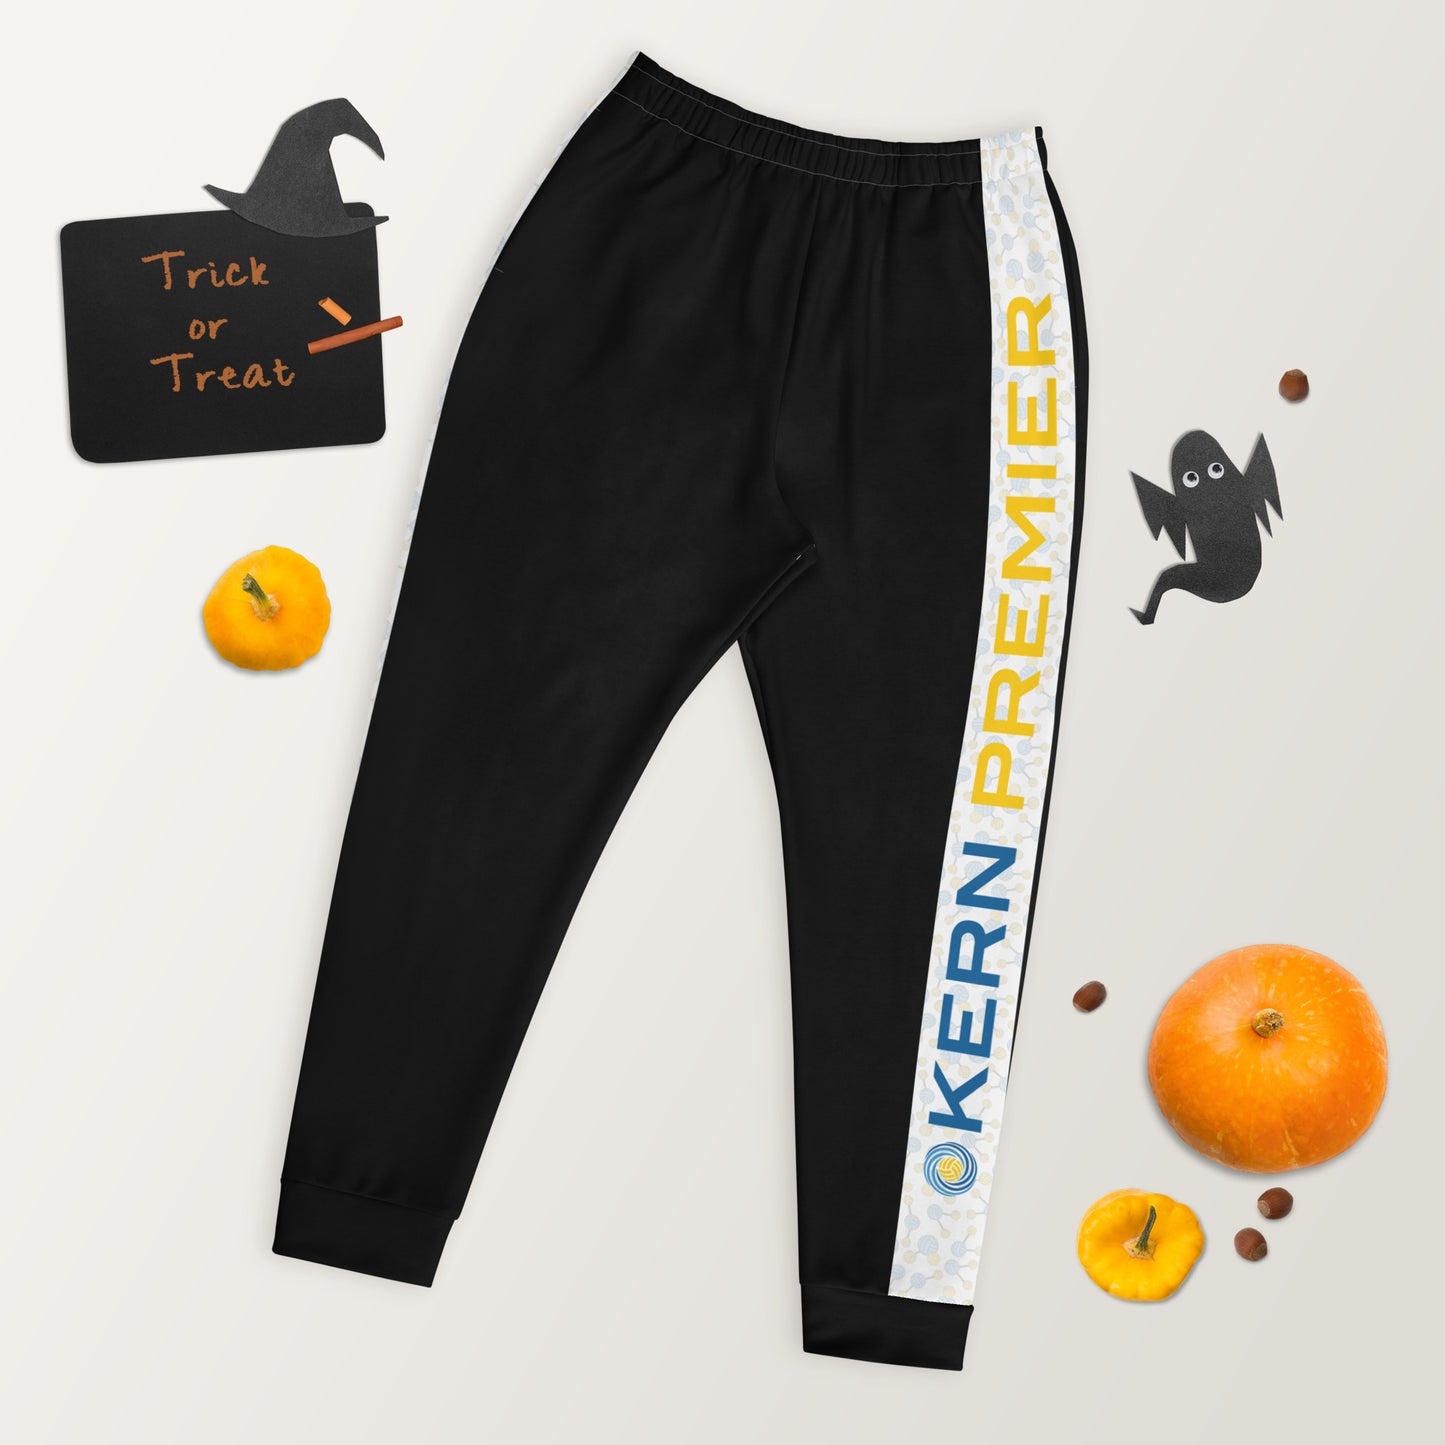 Kern Premier - Black with H20 Waterpolo Molecule Stripe and Logo - Joggers